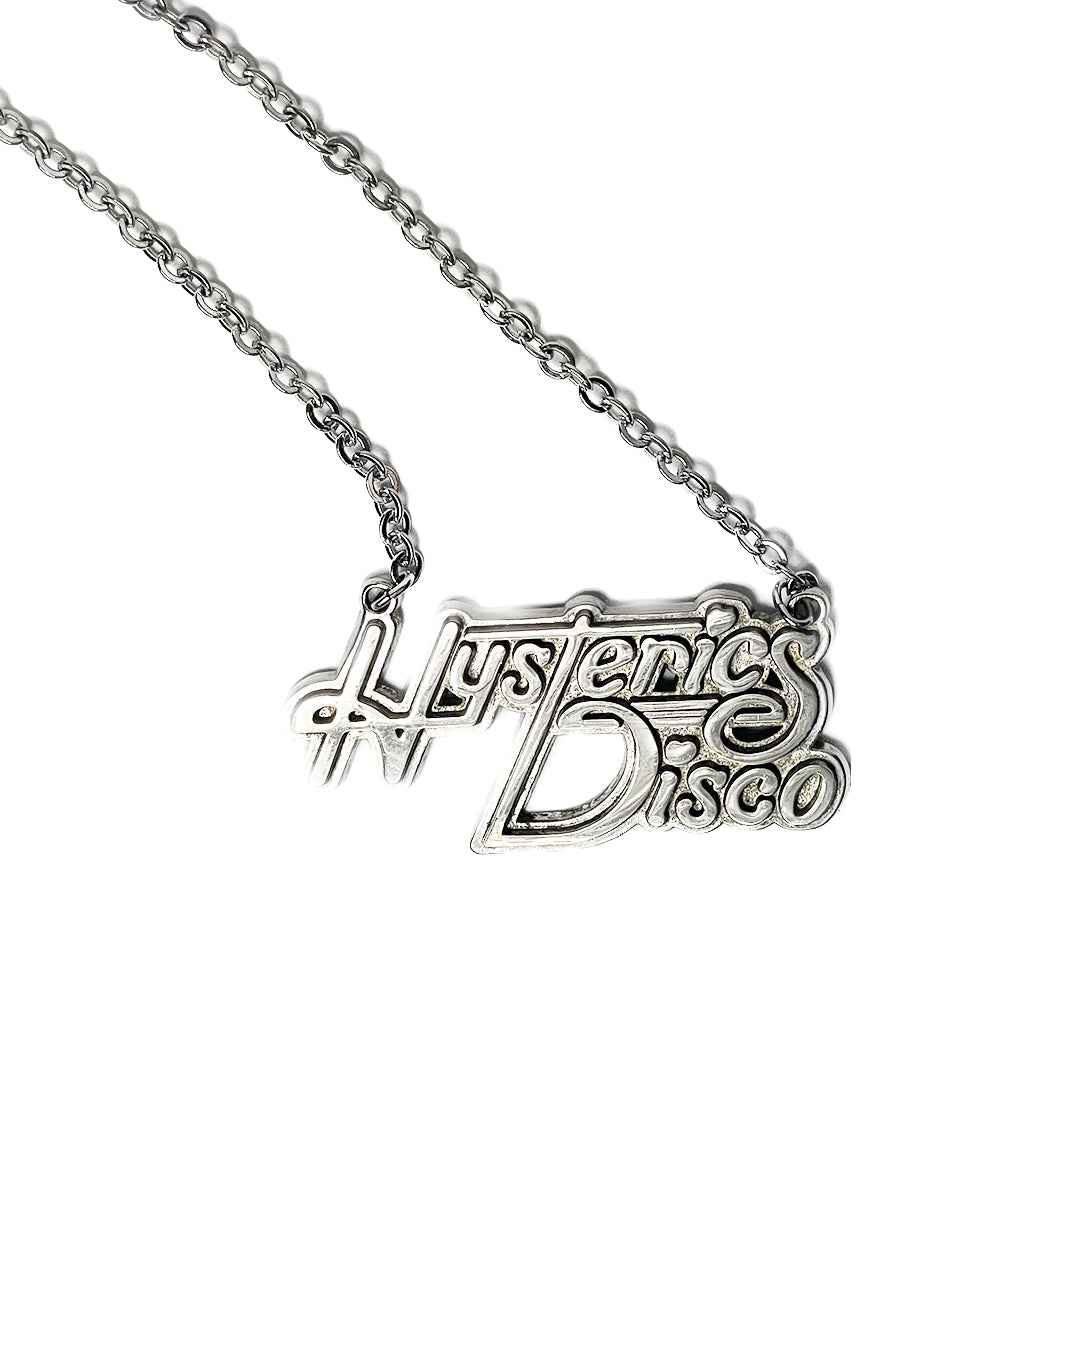 Hysteric Disco Necklace